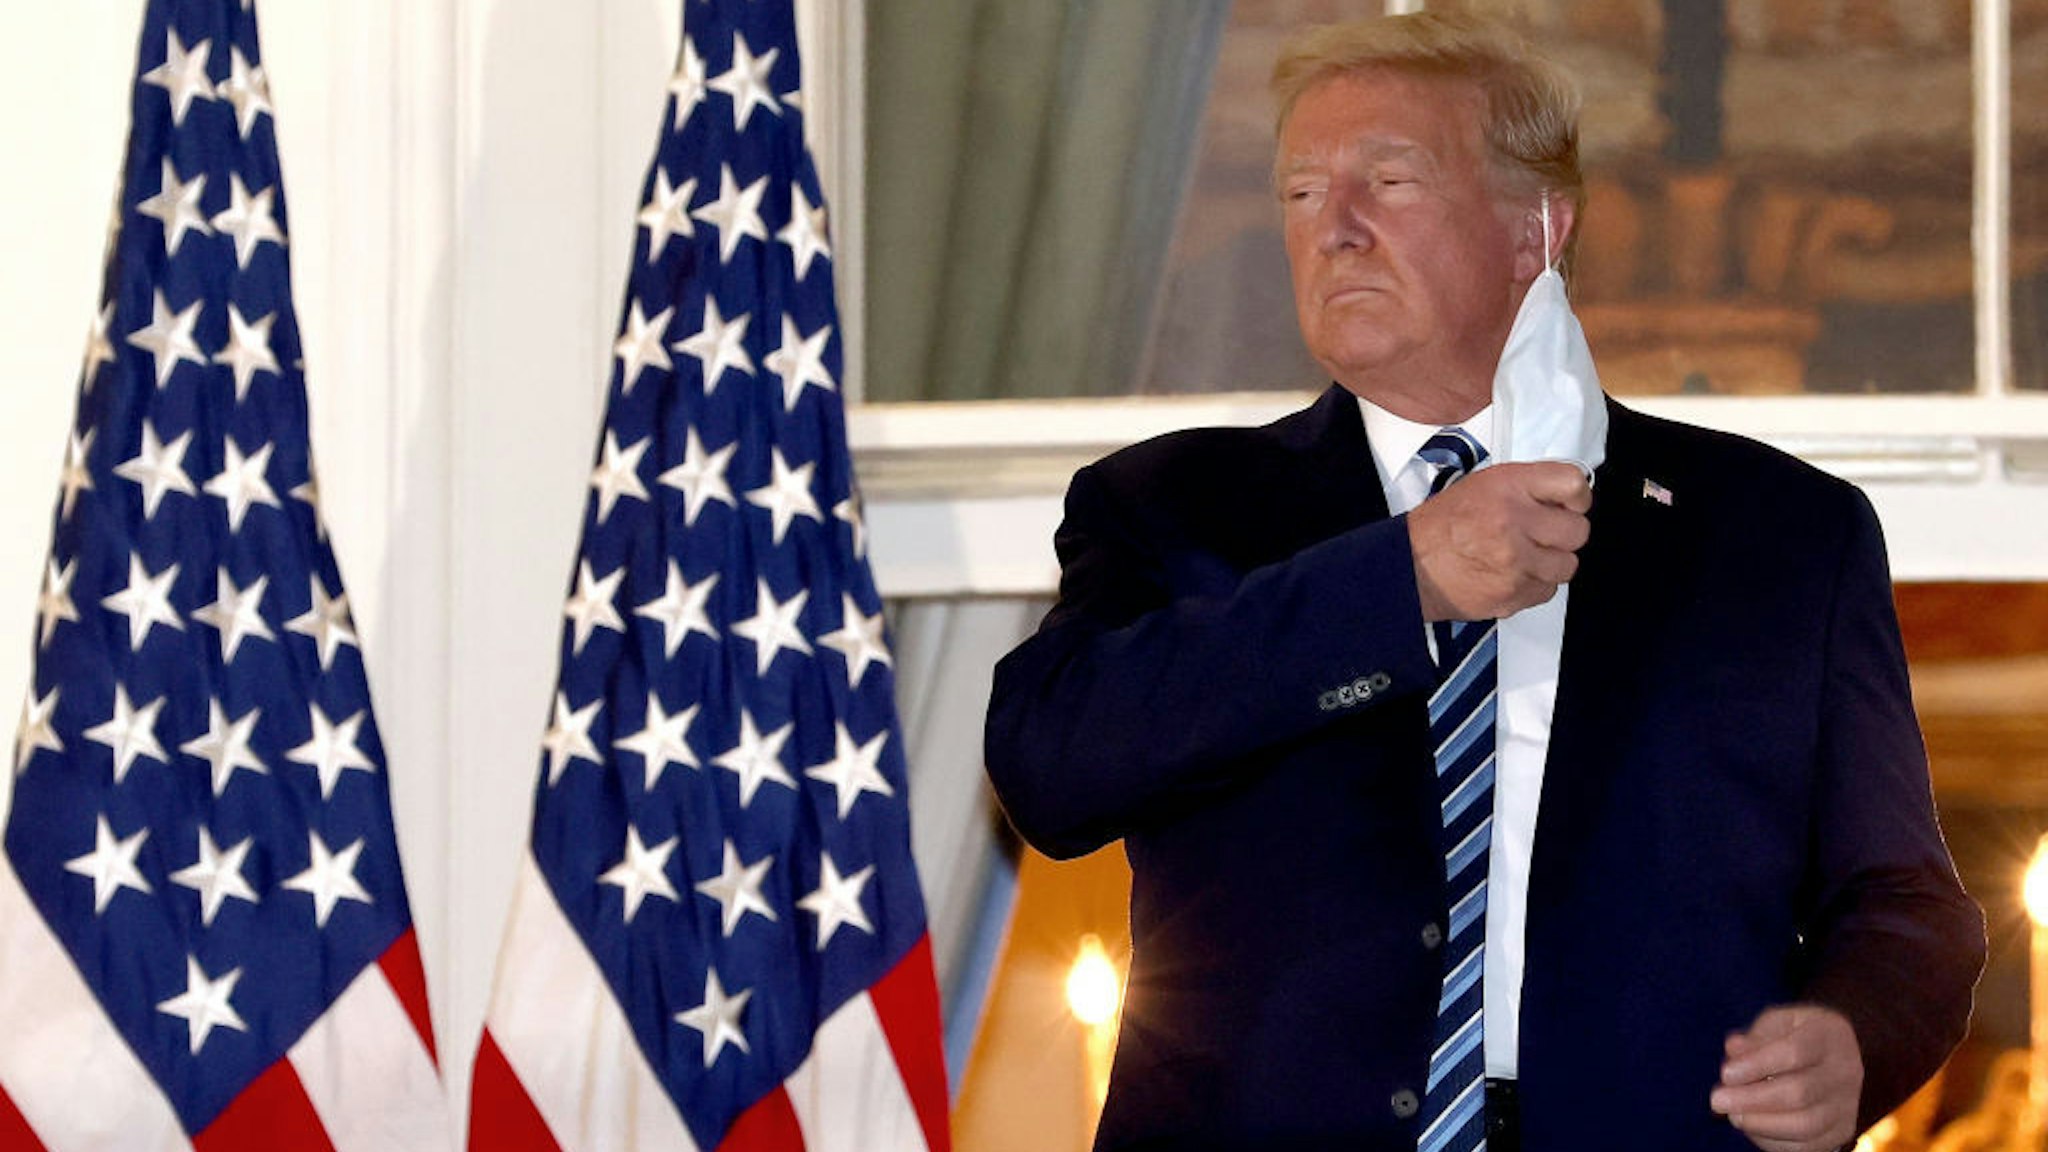 U.S. President Donald Trump removes his mask upon return to the White House from Walter Reed National Military Medical Center on October 05, 2020 in Washington, DC. Trump spent three days hospitalized for coronavirus. (Photo by Win McNamee/Getty Images)